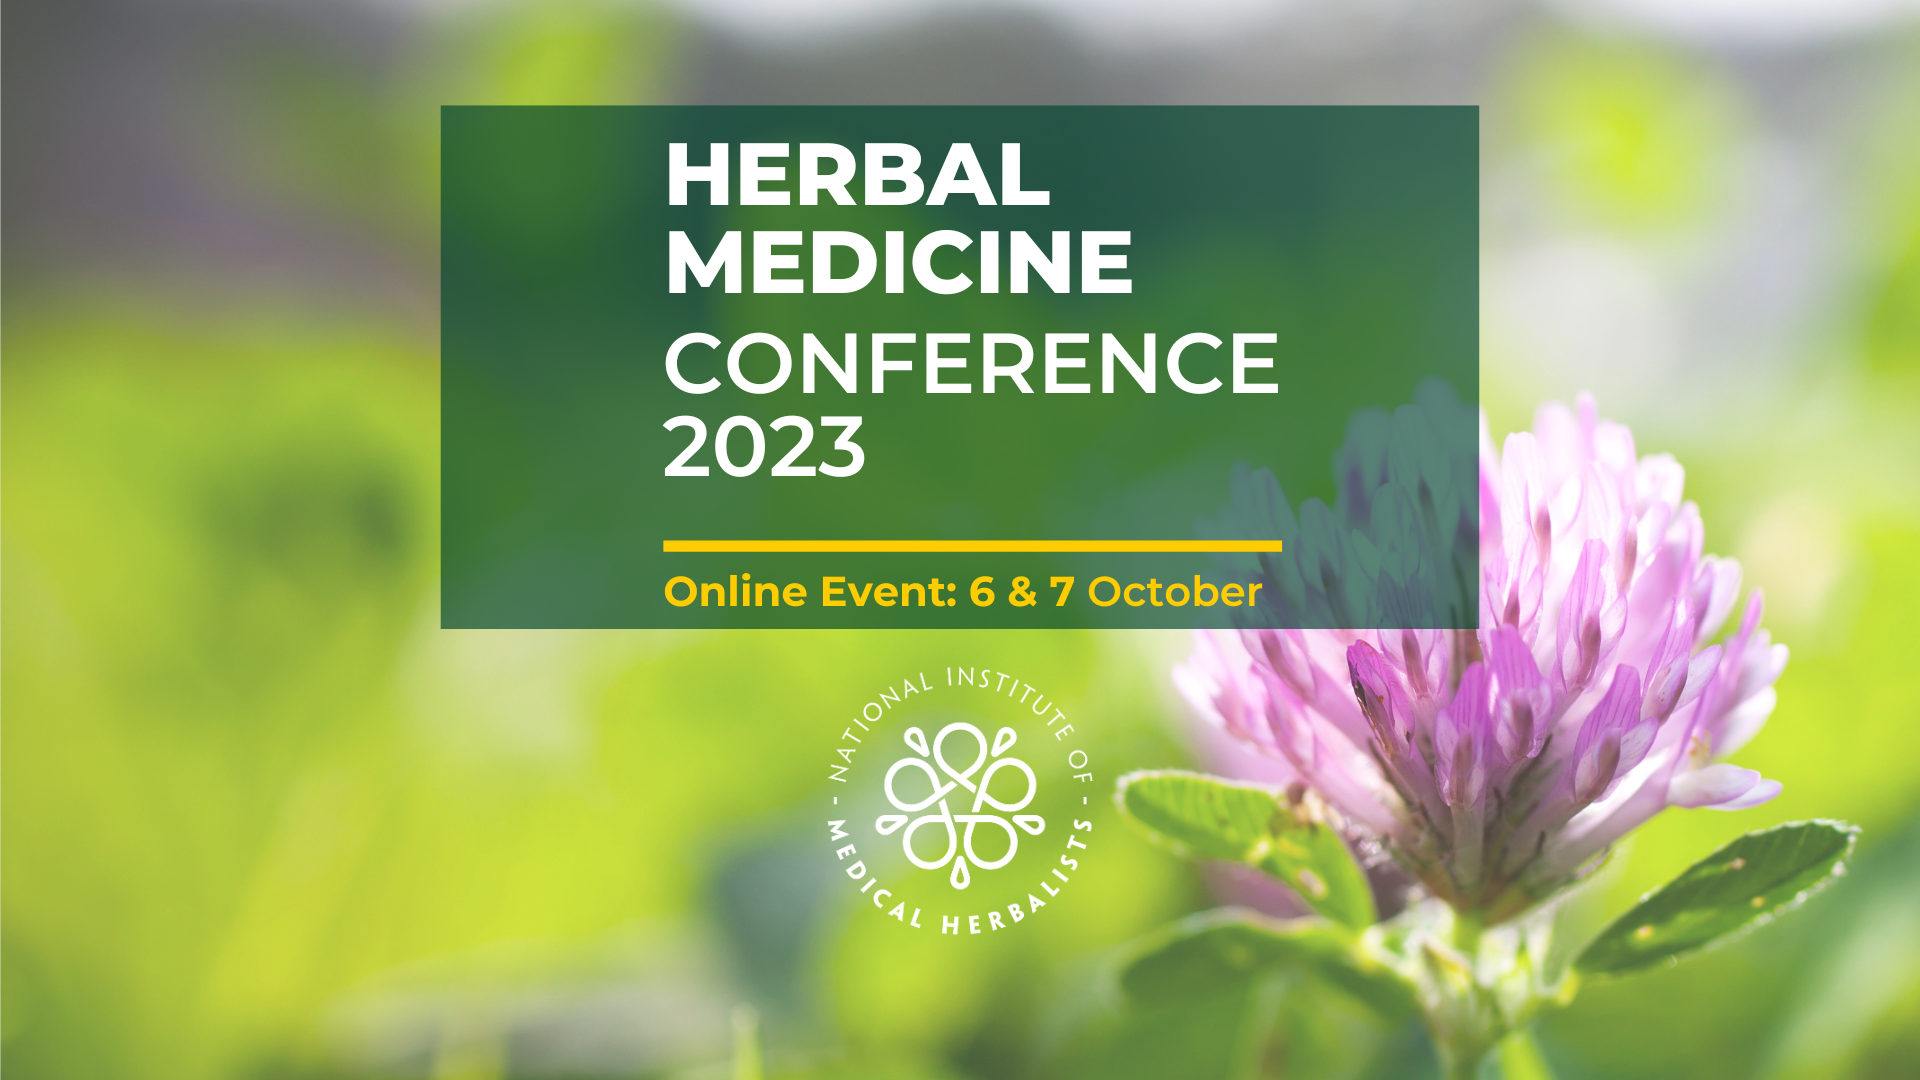 The Herbal Medicine Conference 2023